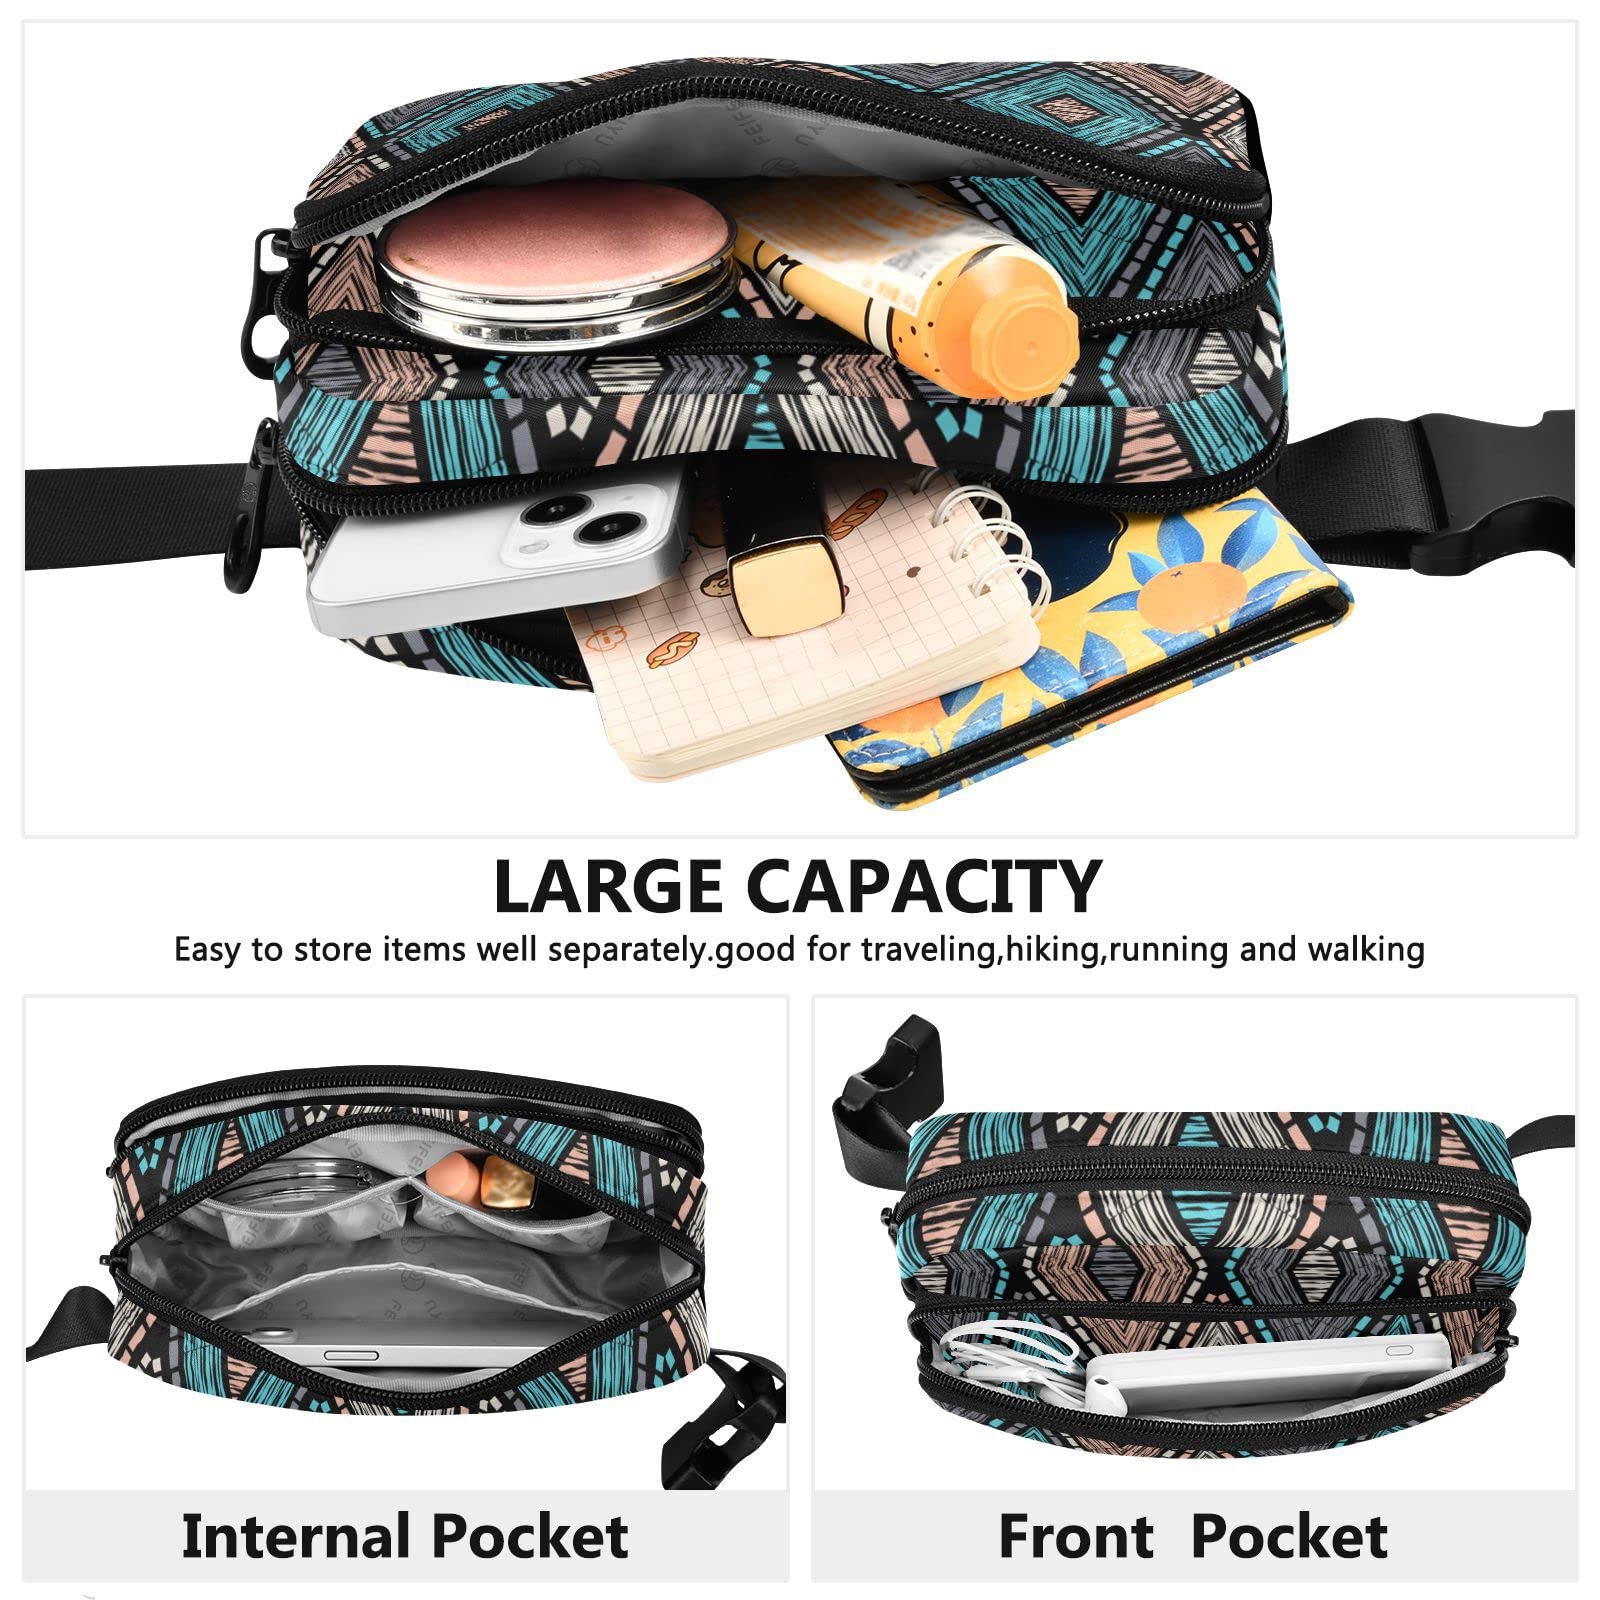 ALAZA Ethnic Boho Geometric Belt Bag Waist Pack Pouch Crossbody Bag with Adjustable Strap for Men Women College Hiking Running Workout Travel